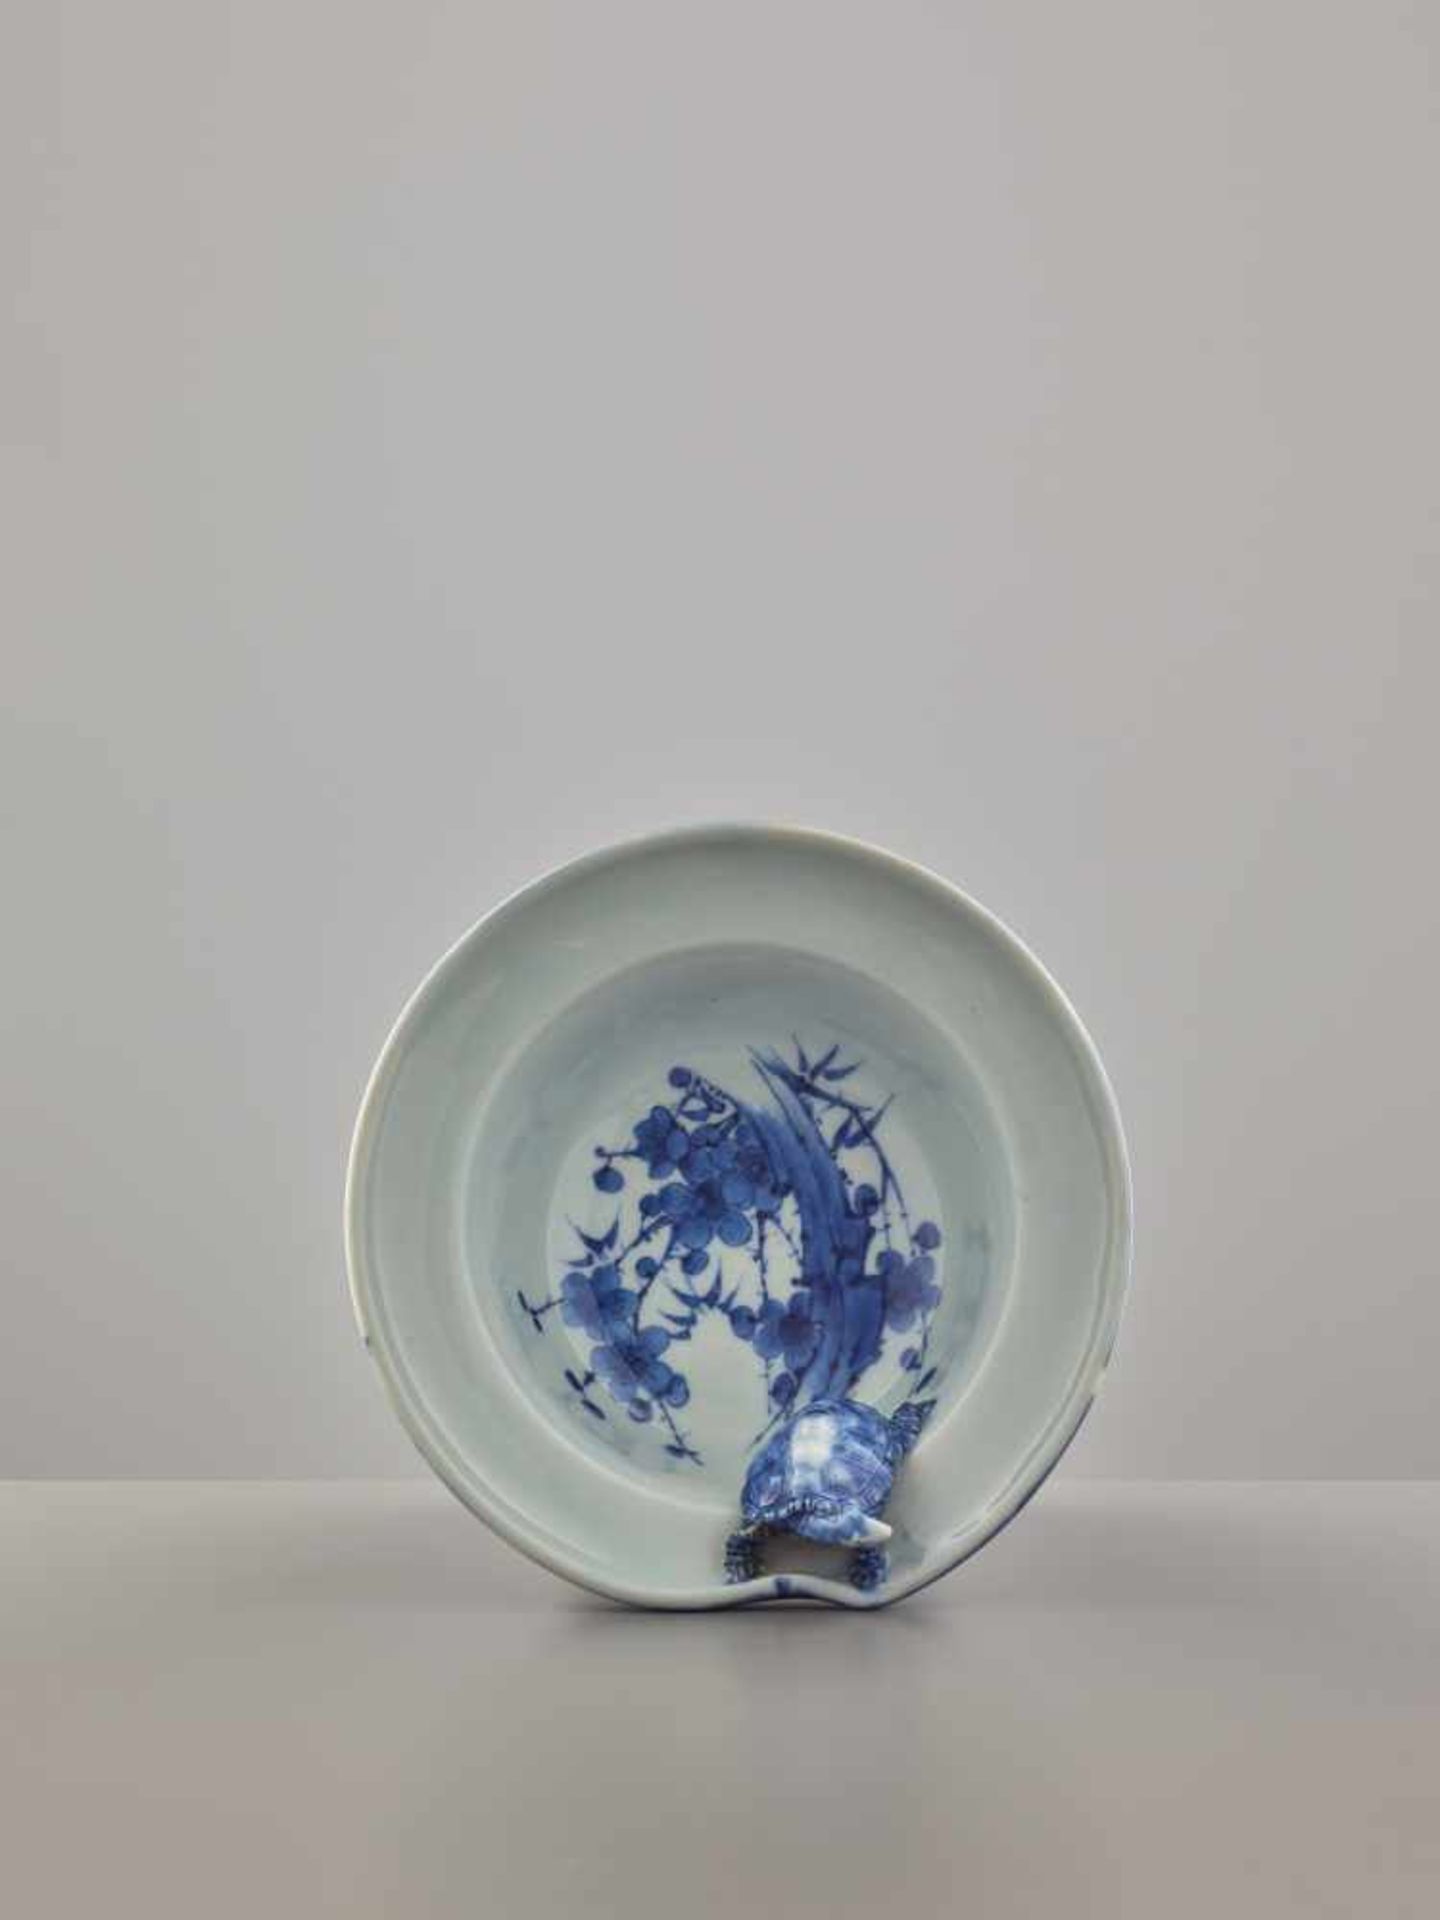 AN AMUSING HIRADO STYLE BLUE AND WHITE PORCELAIN VESSEL WITH AN ESCAPING TORTOISEPorcelainJapan, - Image 3 of 8